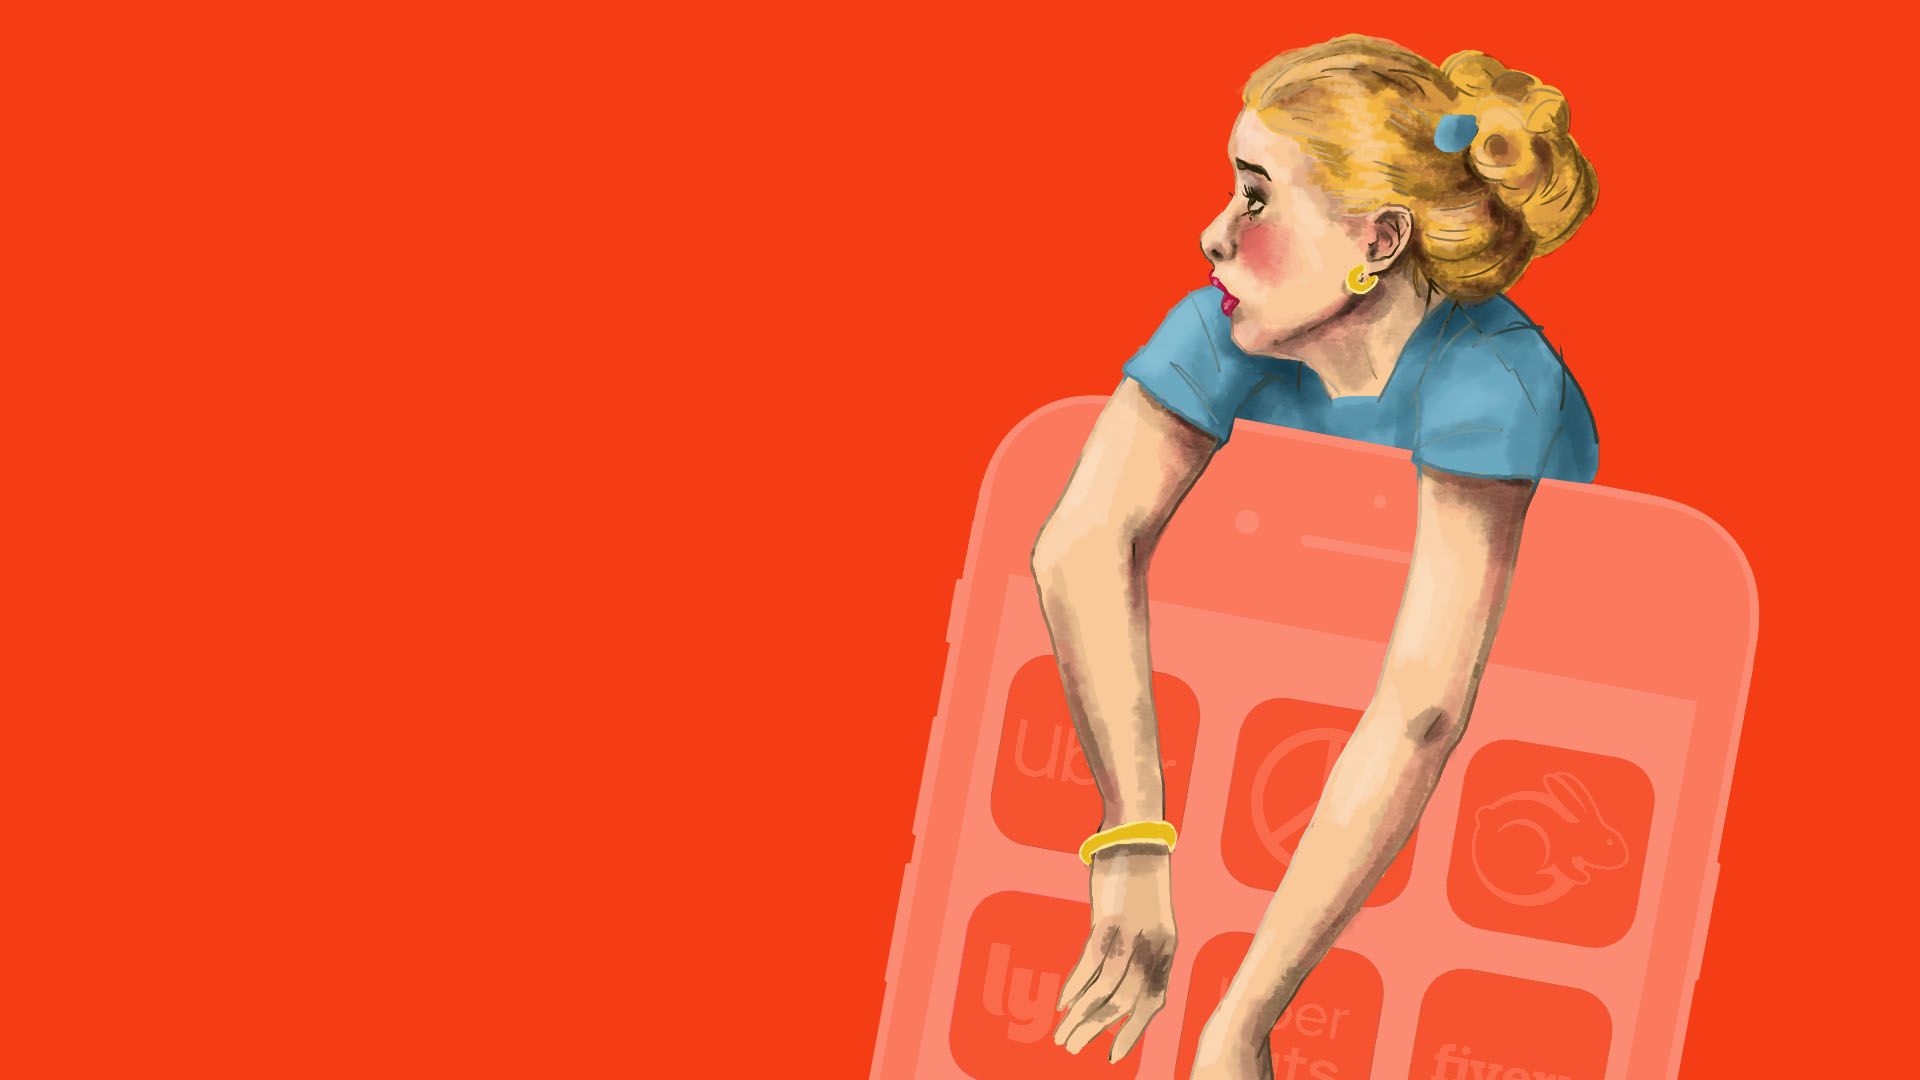 Illustration of woman leaning over a giant cell phone